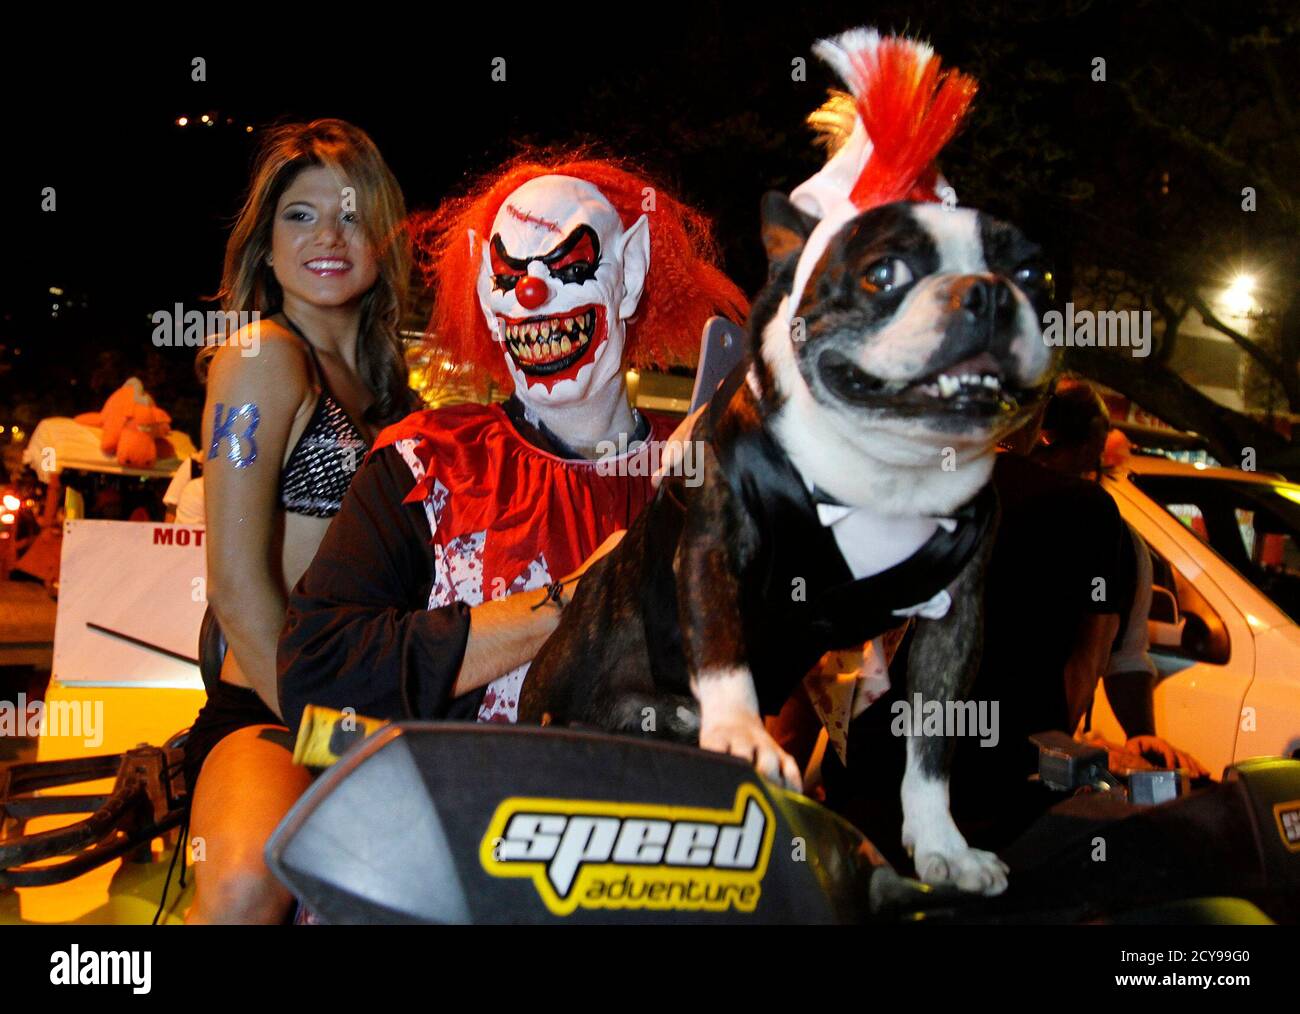 A couple dressed in costume rides a vehicle during the "Moto Halloween  Party 2013" in Cali October 30, 2013. Every year, motorcycling enthusiasts  dress up in outfits and ride around Cali to